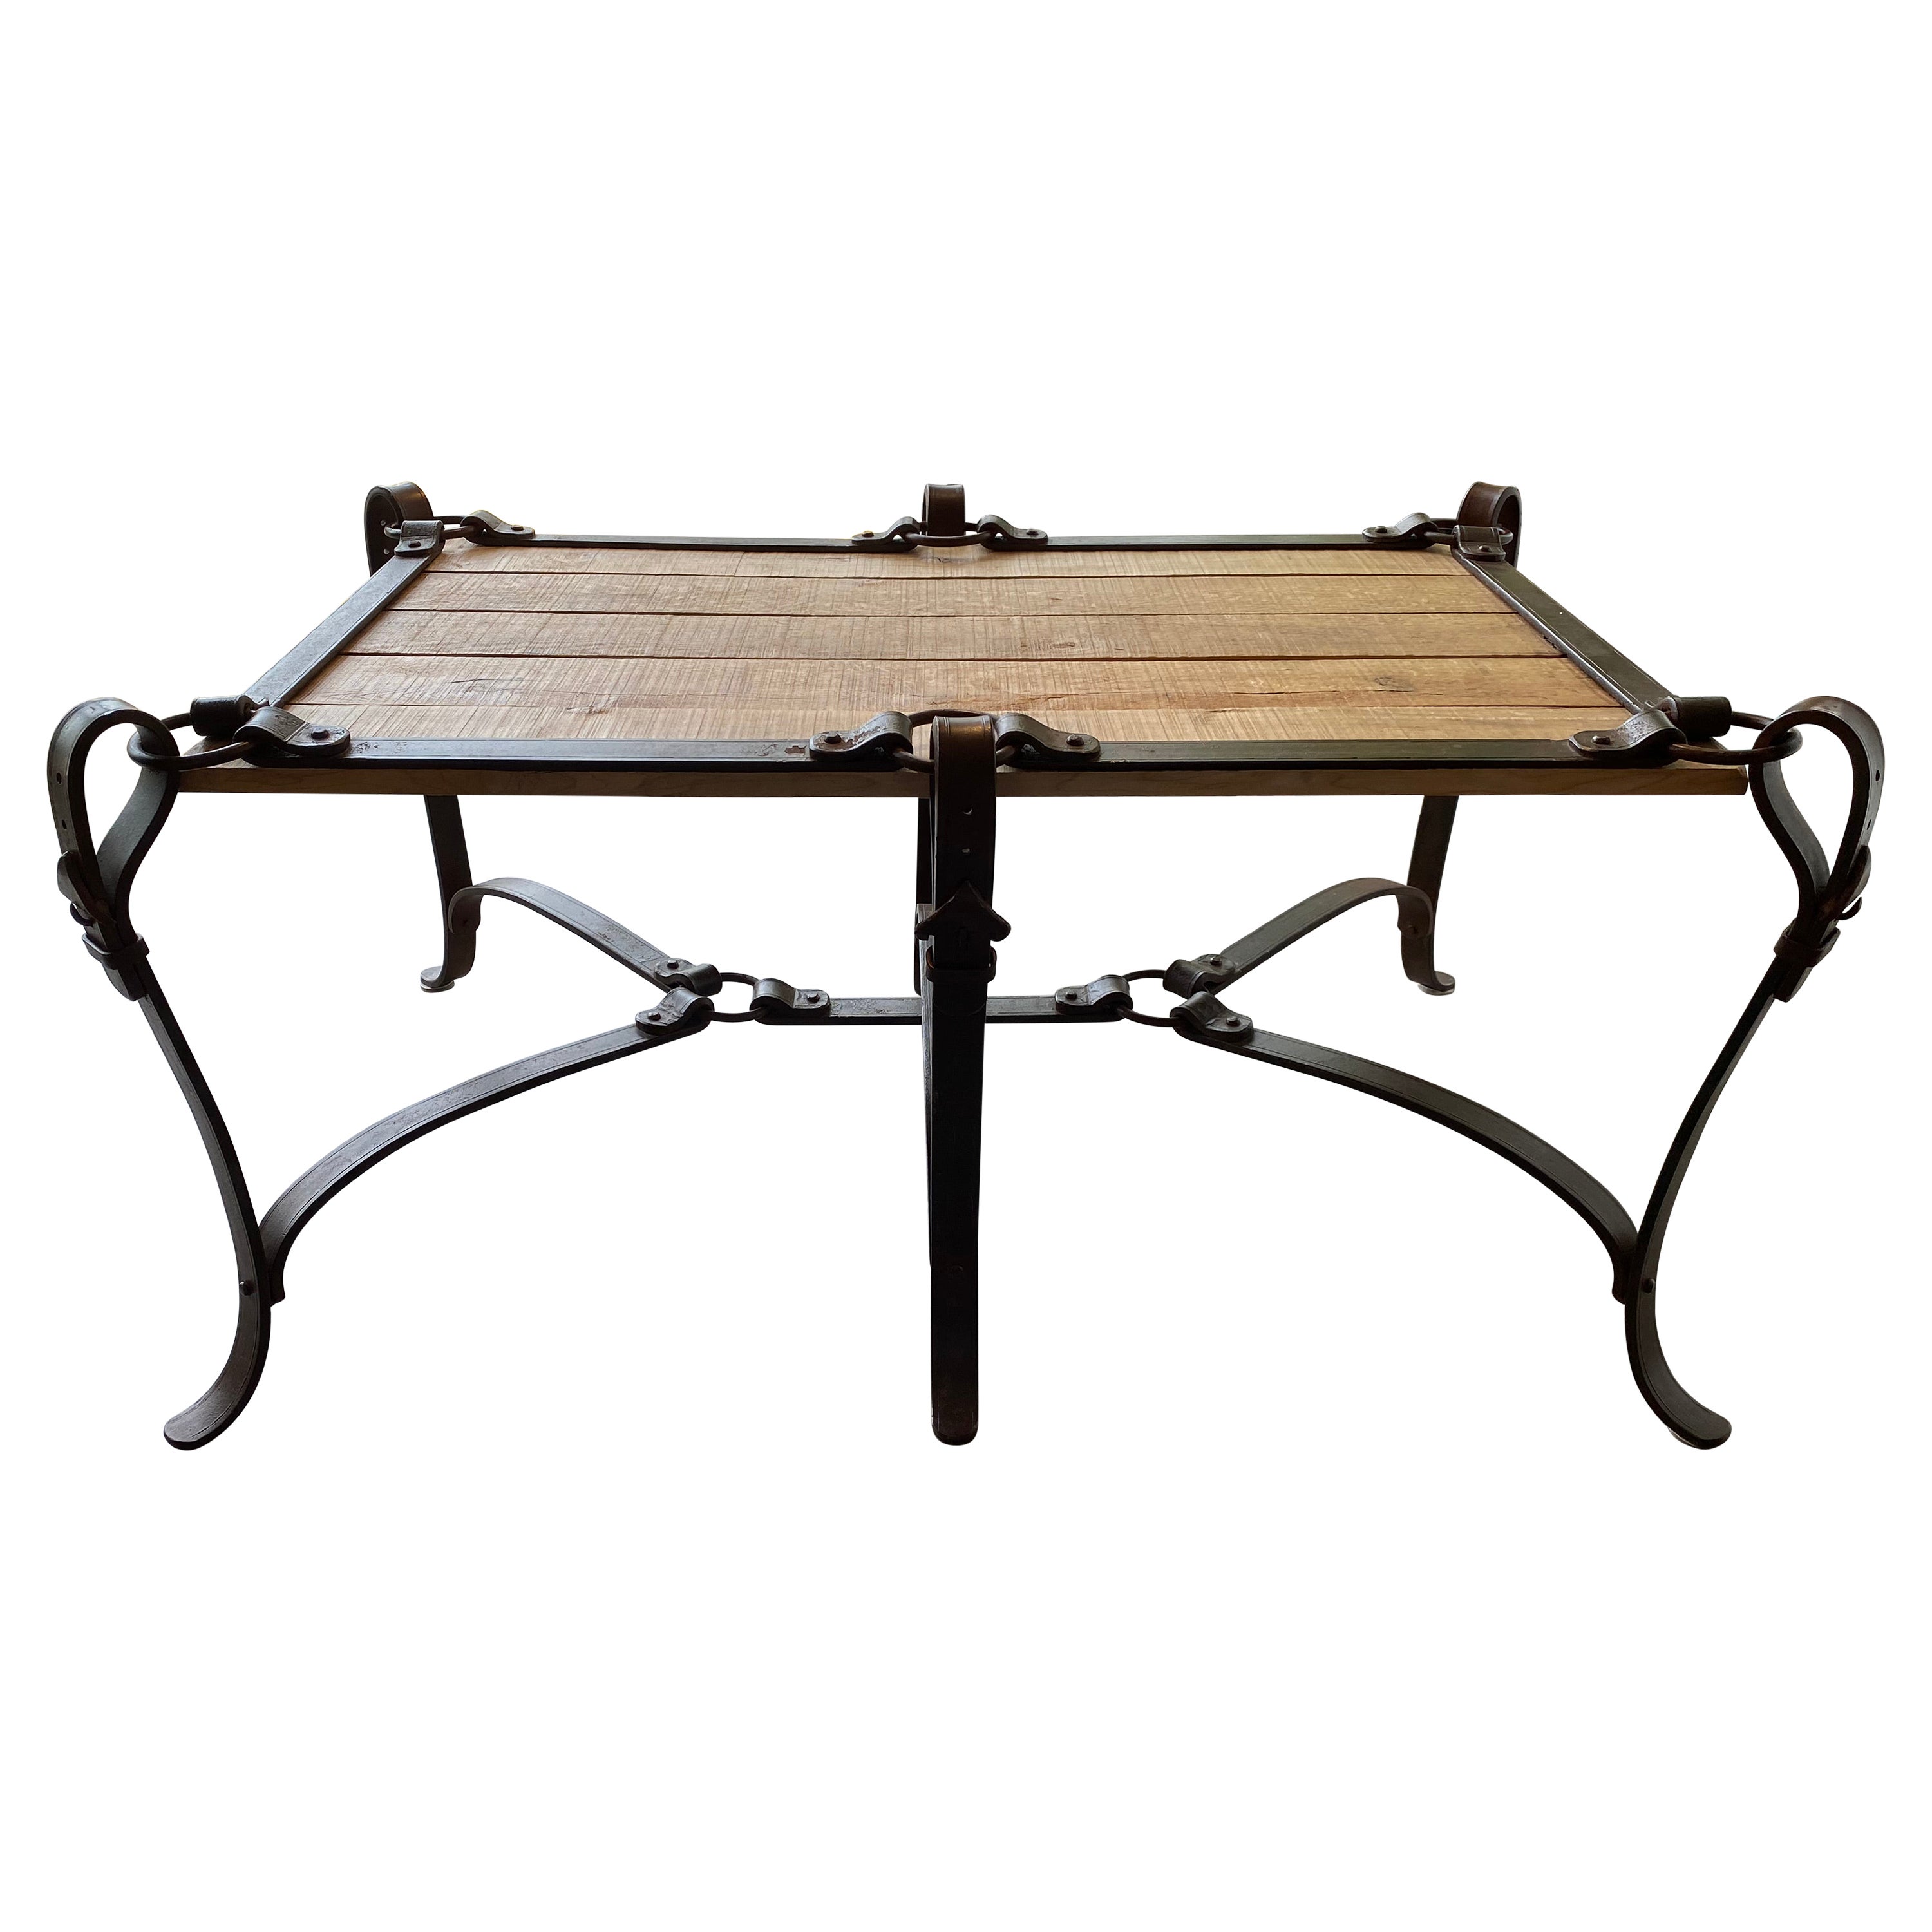 Hermes/Adnet Inspired Iron Belt Cocktail Table, Iron Base, Wood Top, Great Style For Sale